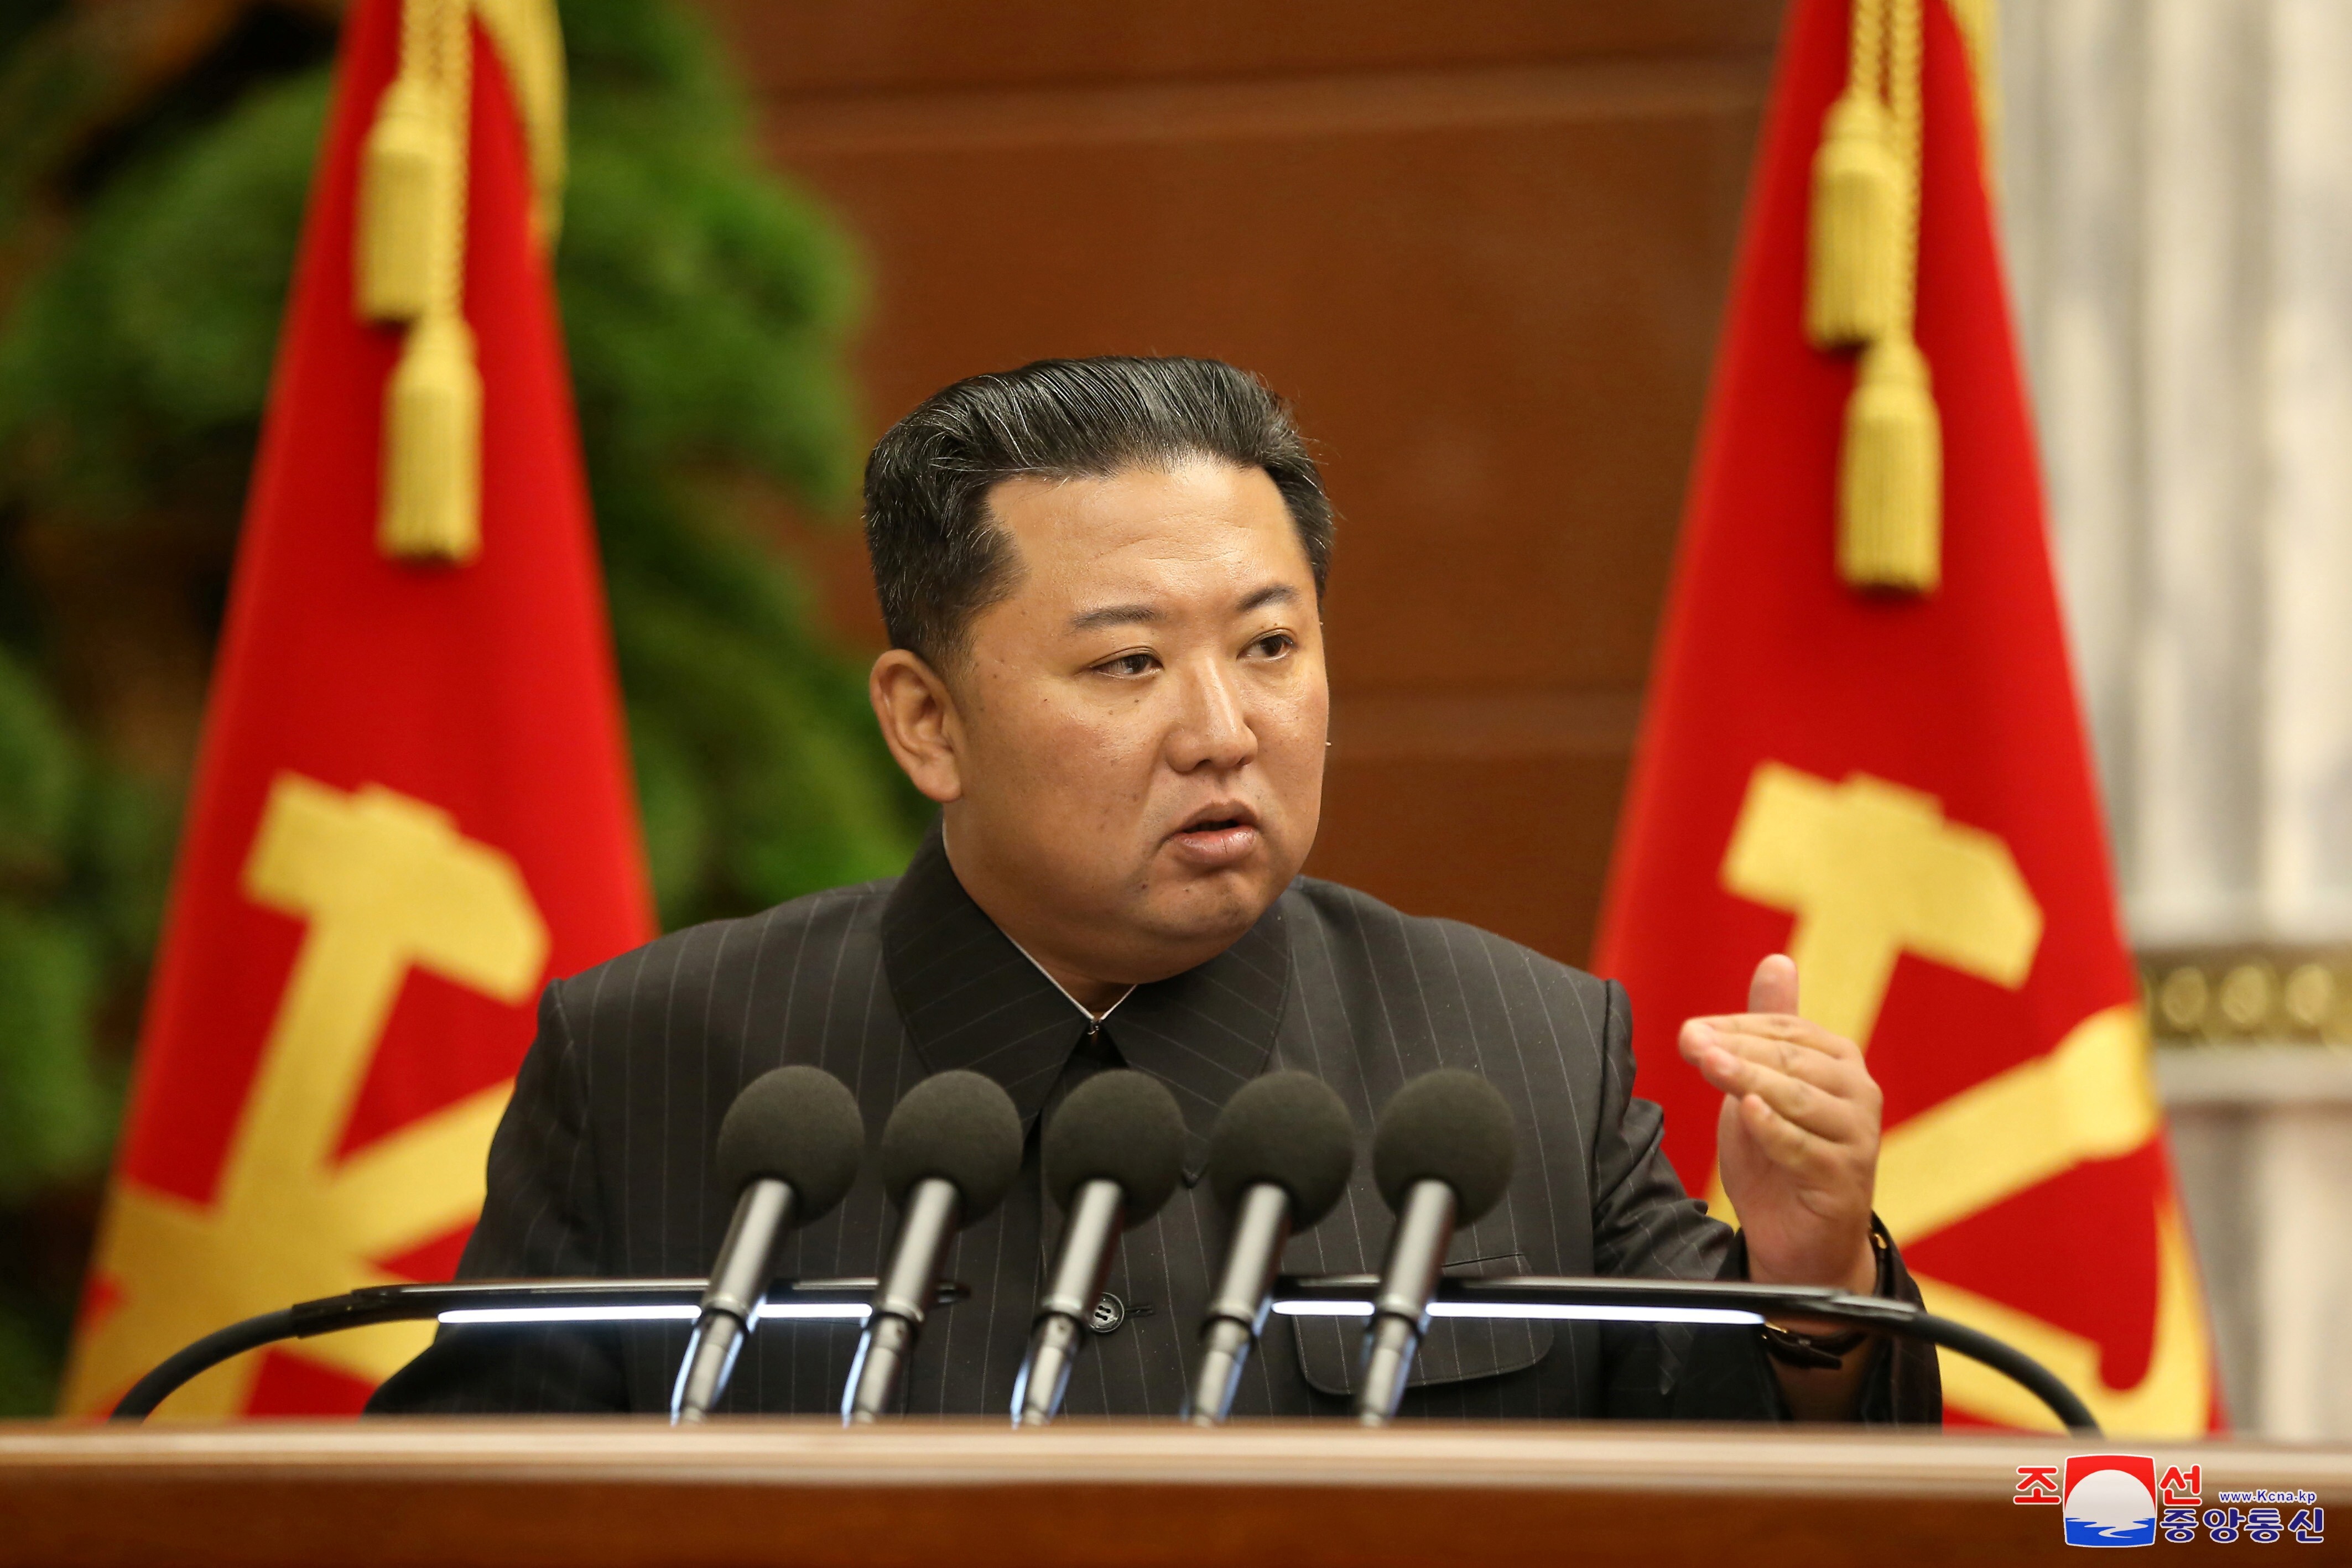 North Korean leader Kim Jong-un speaks during a meeting of the political bureau of the 8th Central Committee of the Workers' Party of Korea in Pyongyang on September 2, calling for tougher coronavirus prevention measures. Photo: Reuters